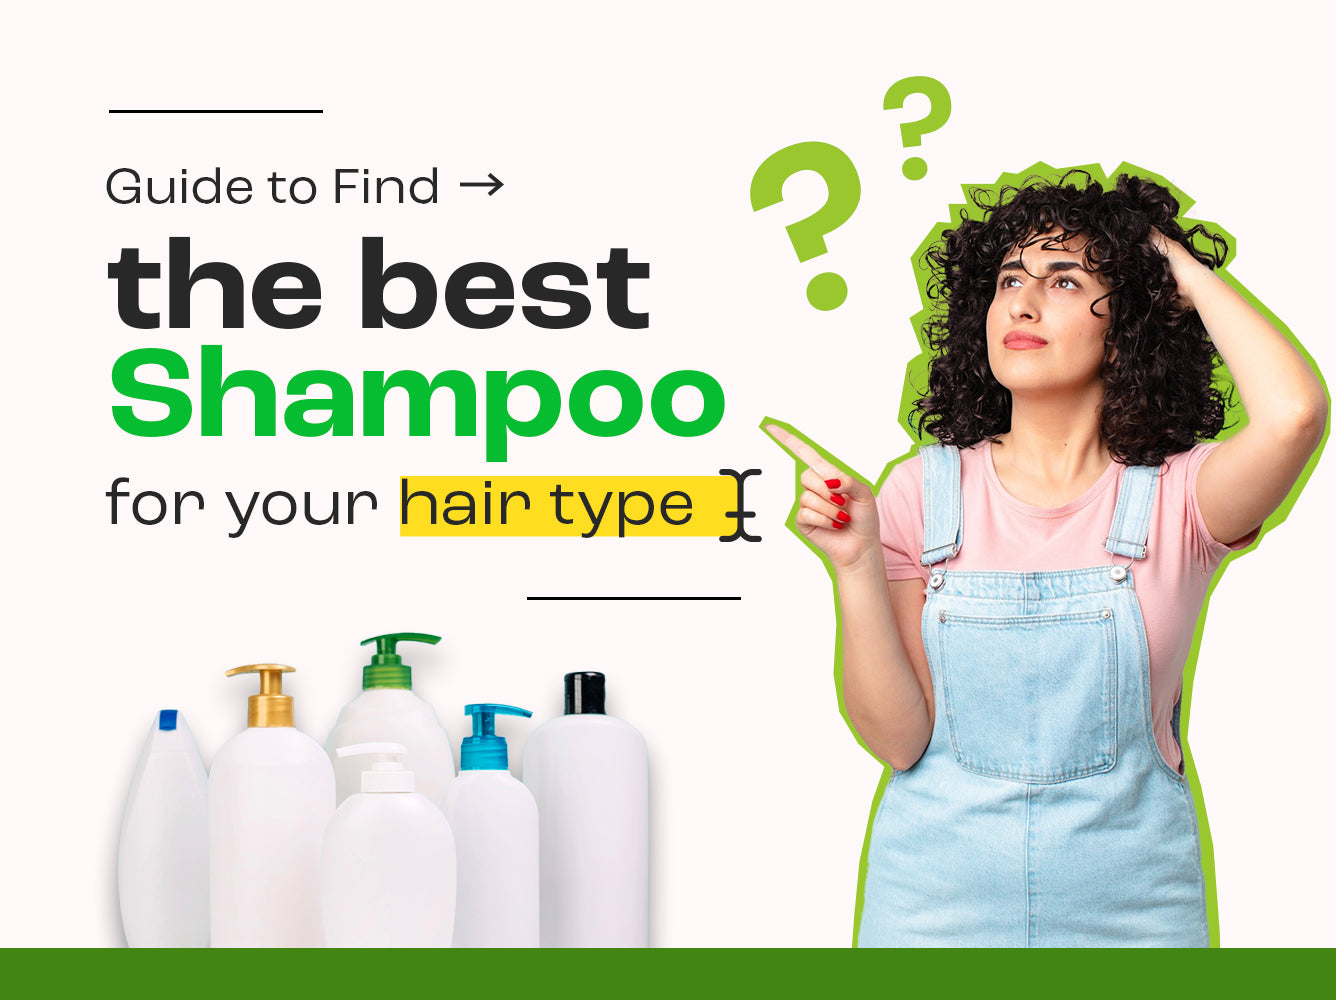 Guide to Find the Best Shampoo for Your Hair Type.